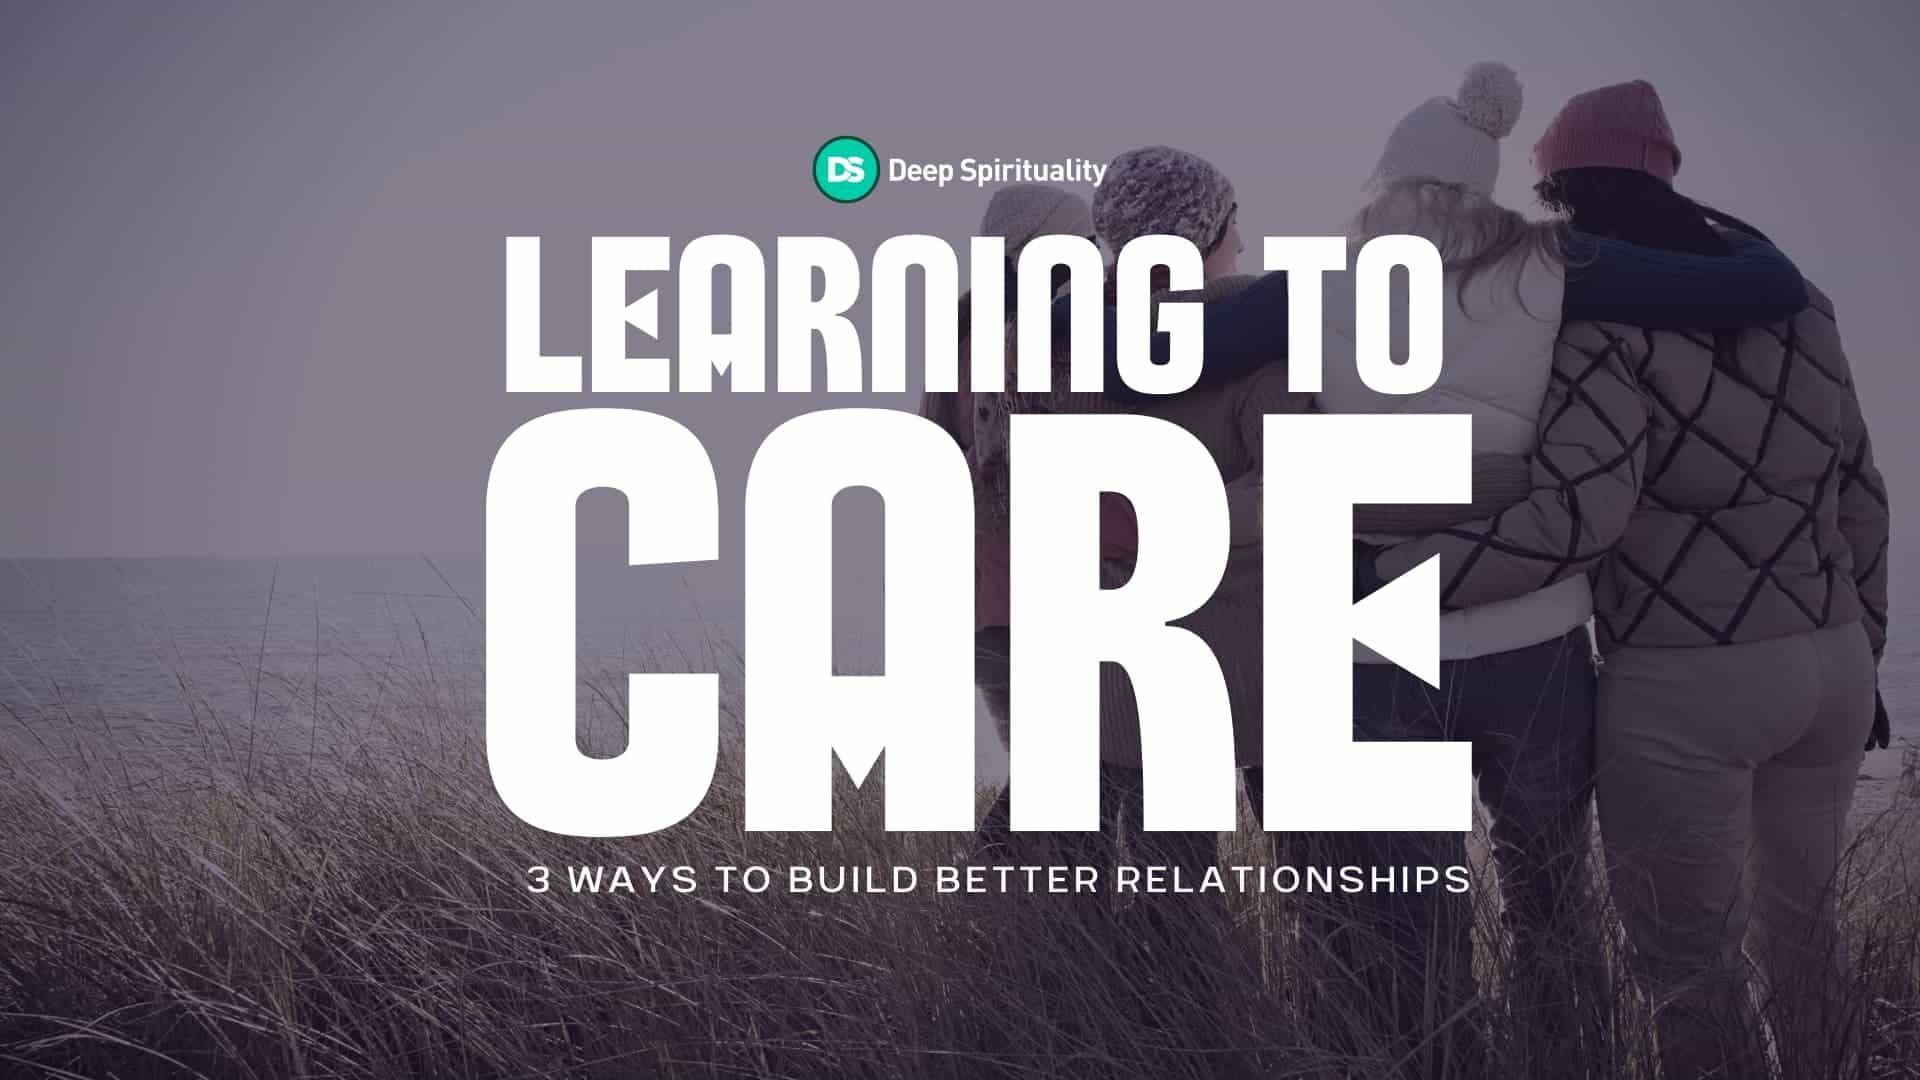 Learning to Care: 3 Ways to Build Better, More Compassionate Relationships 8